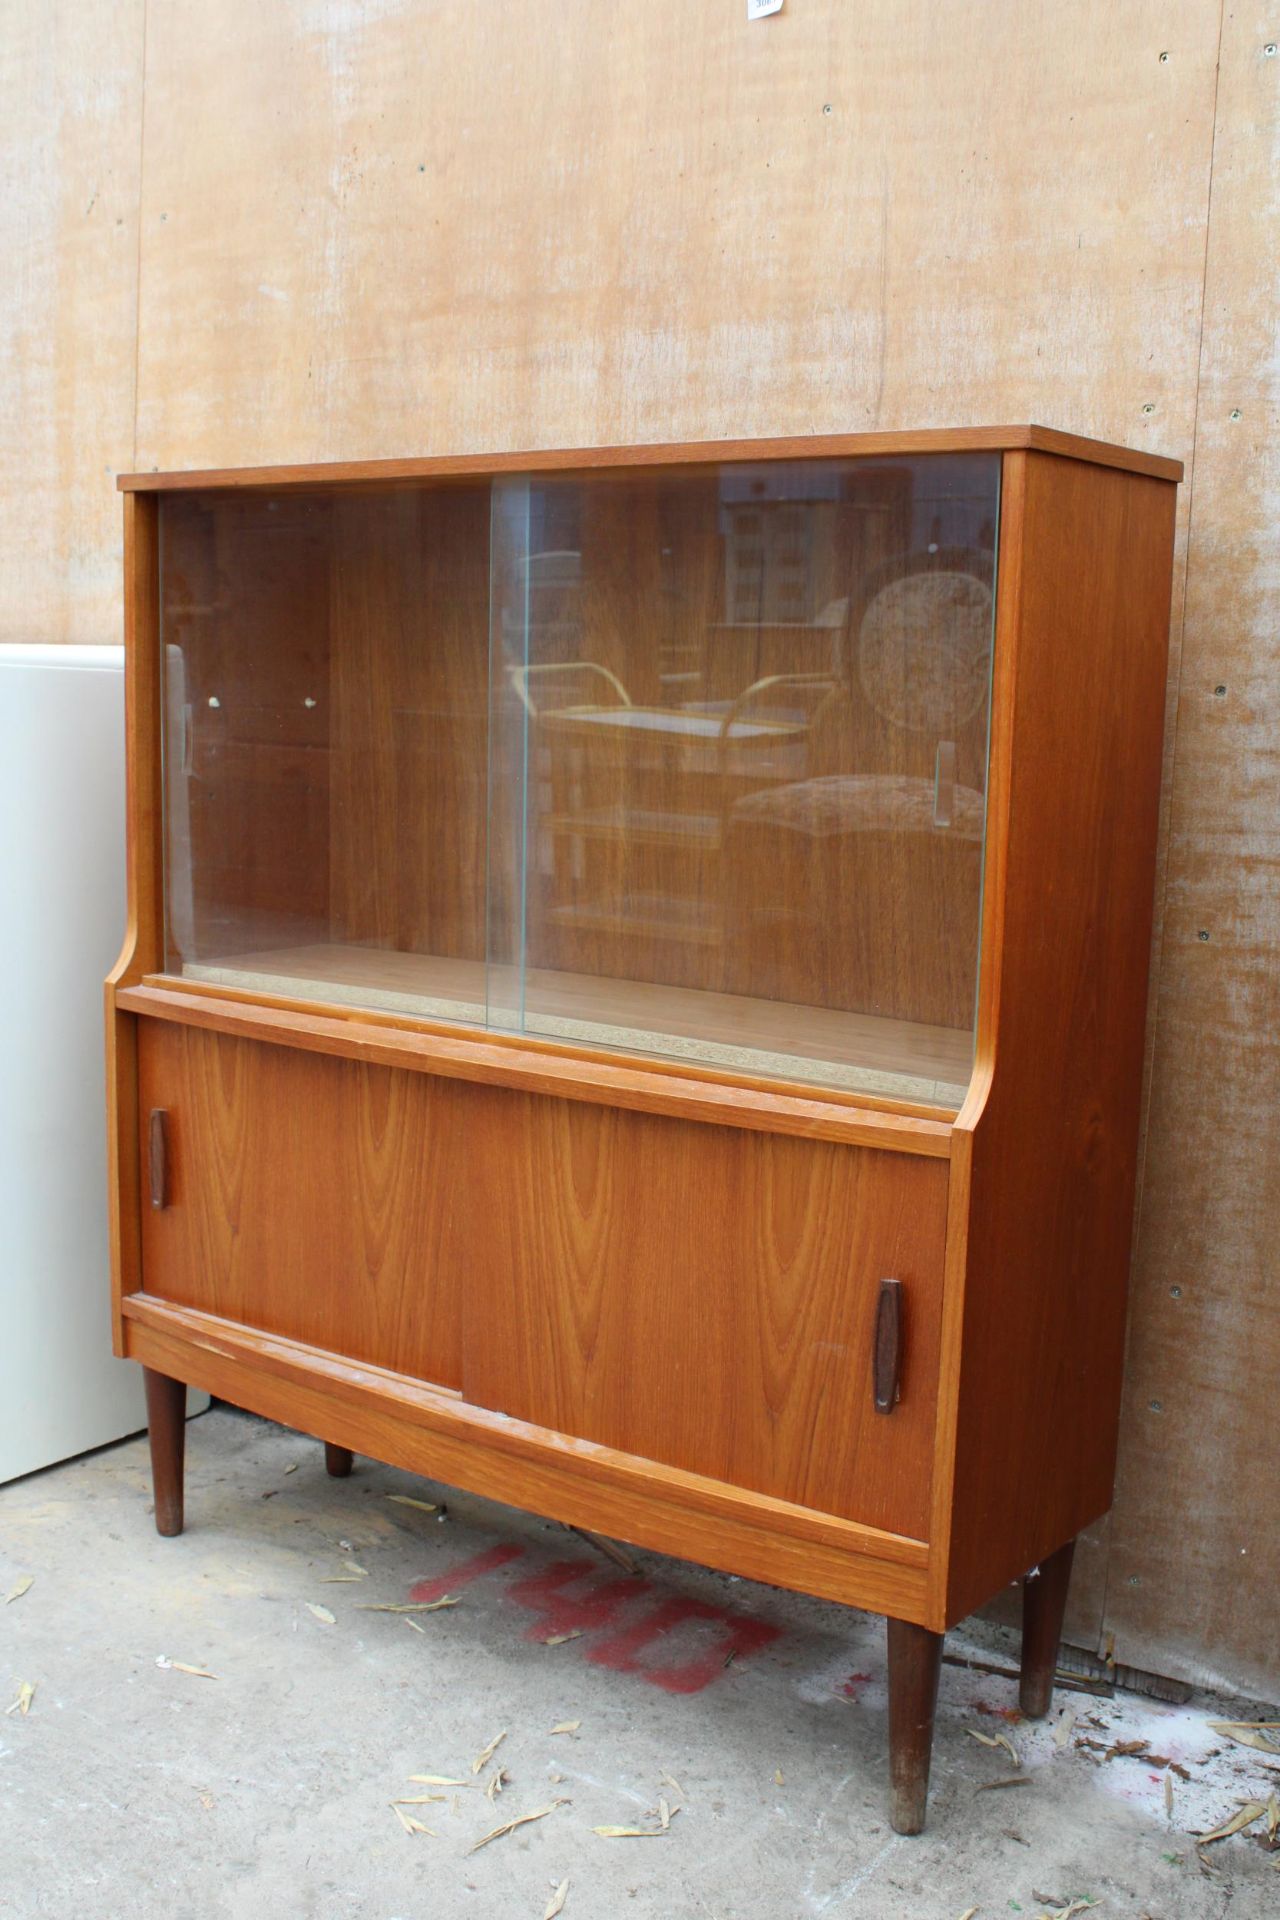 A RETRO TEAK DONCRAFT FURNITURE RETRO BOOKCASE WITH FOUR SLIDING DOORS, TWO BEING GLASS 36" WIDE - Image 2 of 3